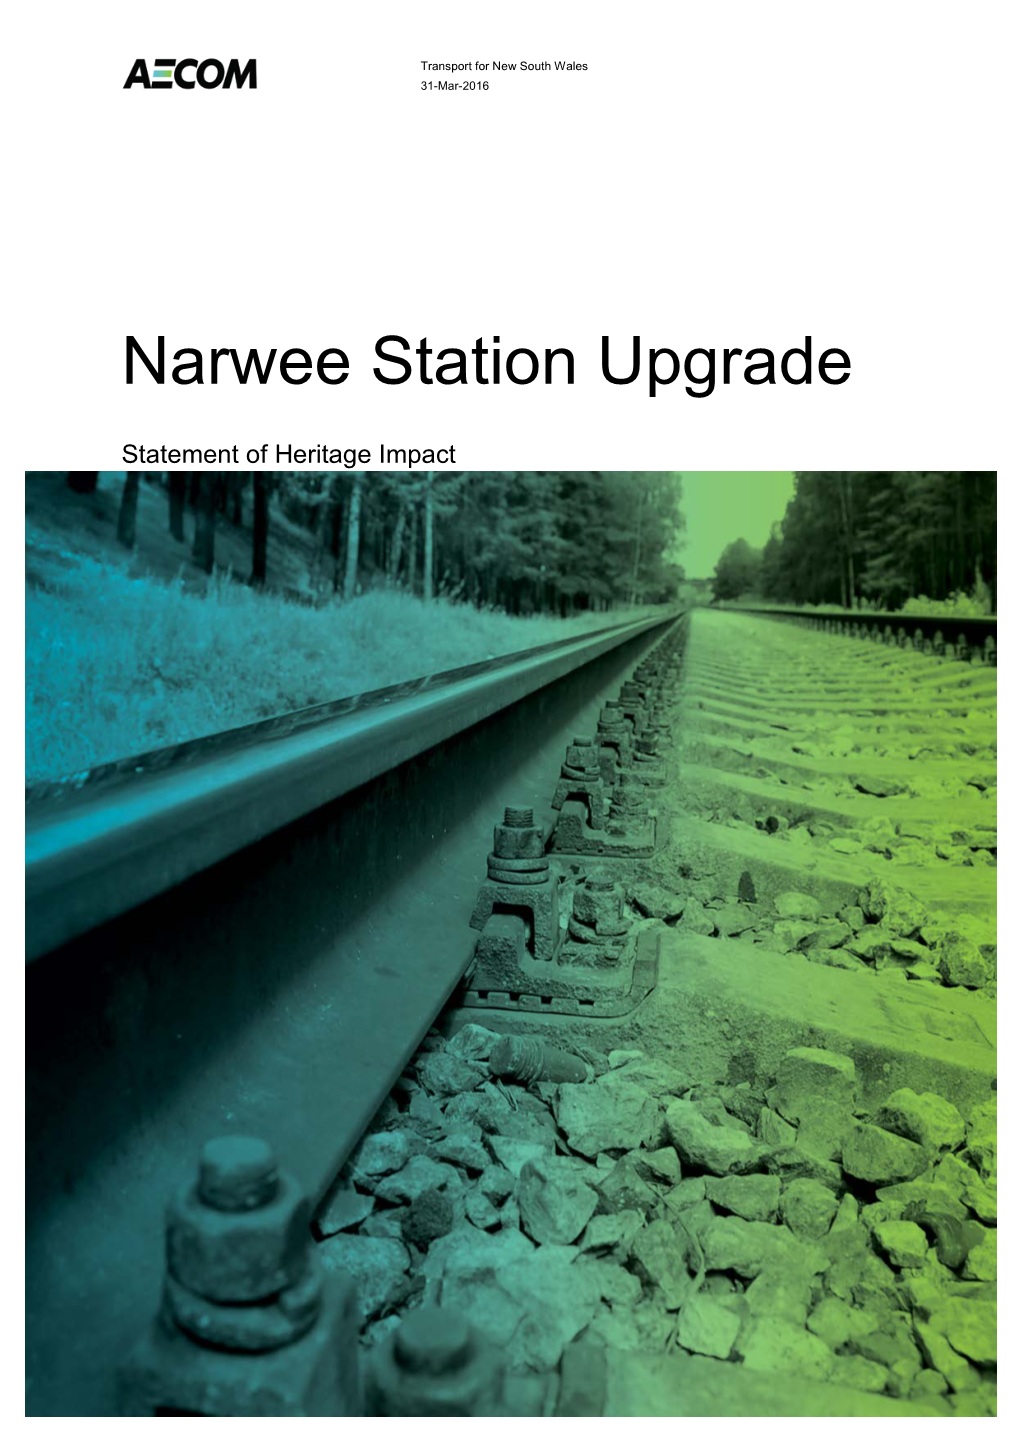 Narwee Station Upgrade Statement of Heritage Impact March 2016